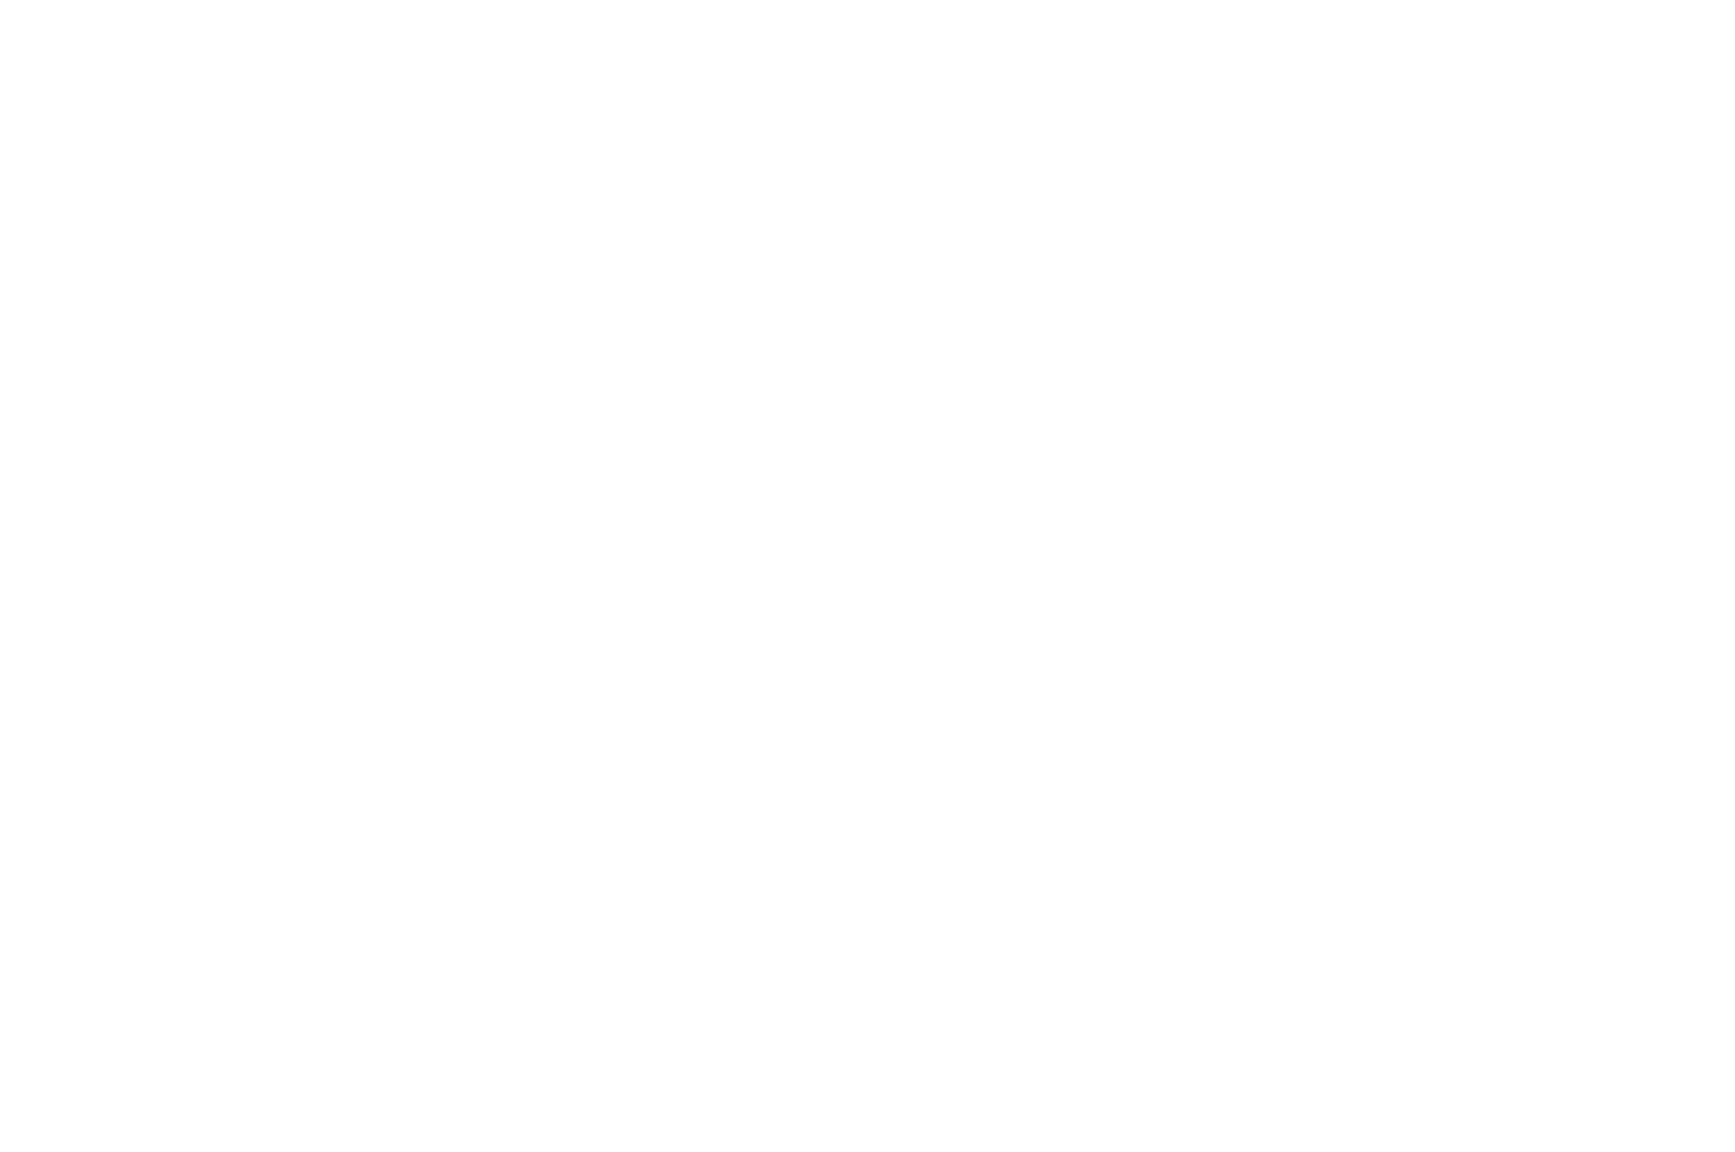 OFFICIAL SELECTION - Afro Latino Film Festival - 2023 3.png